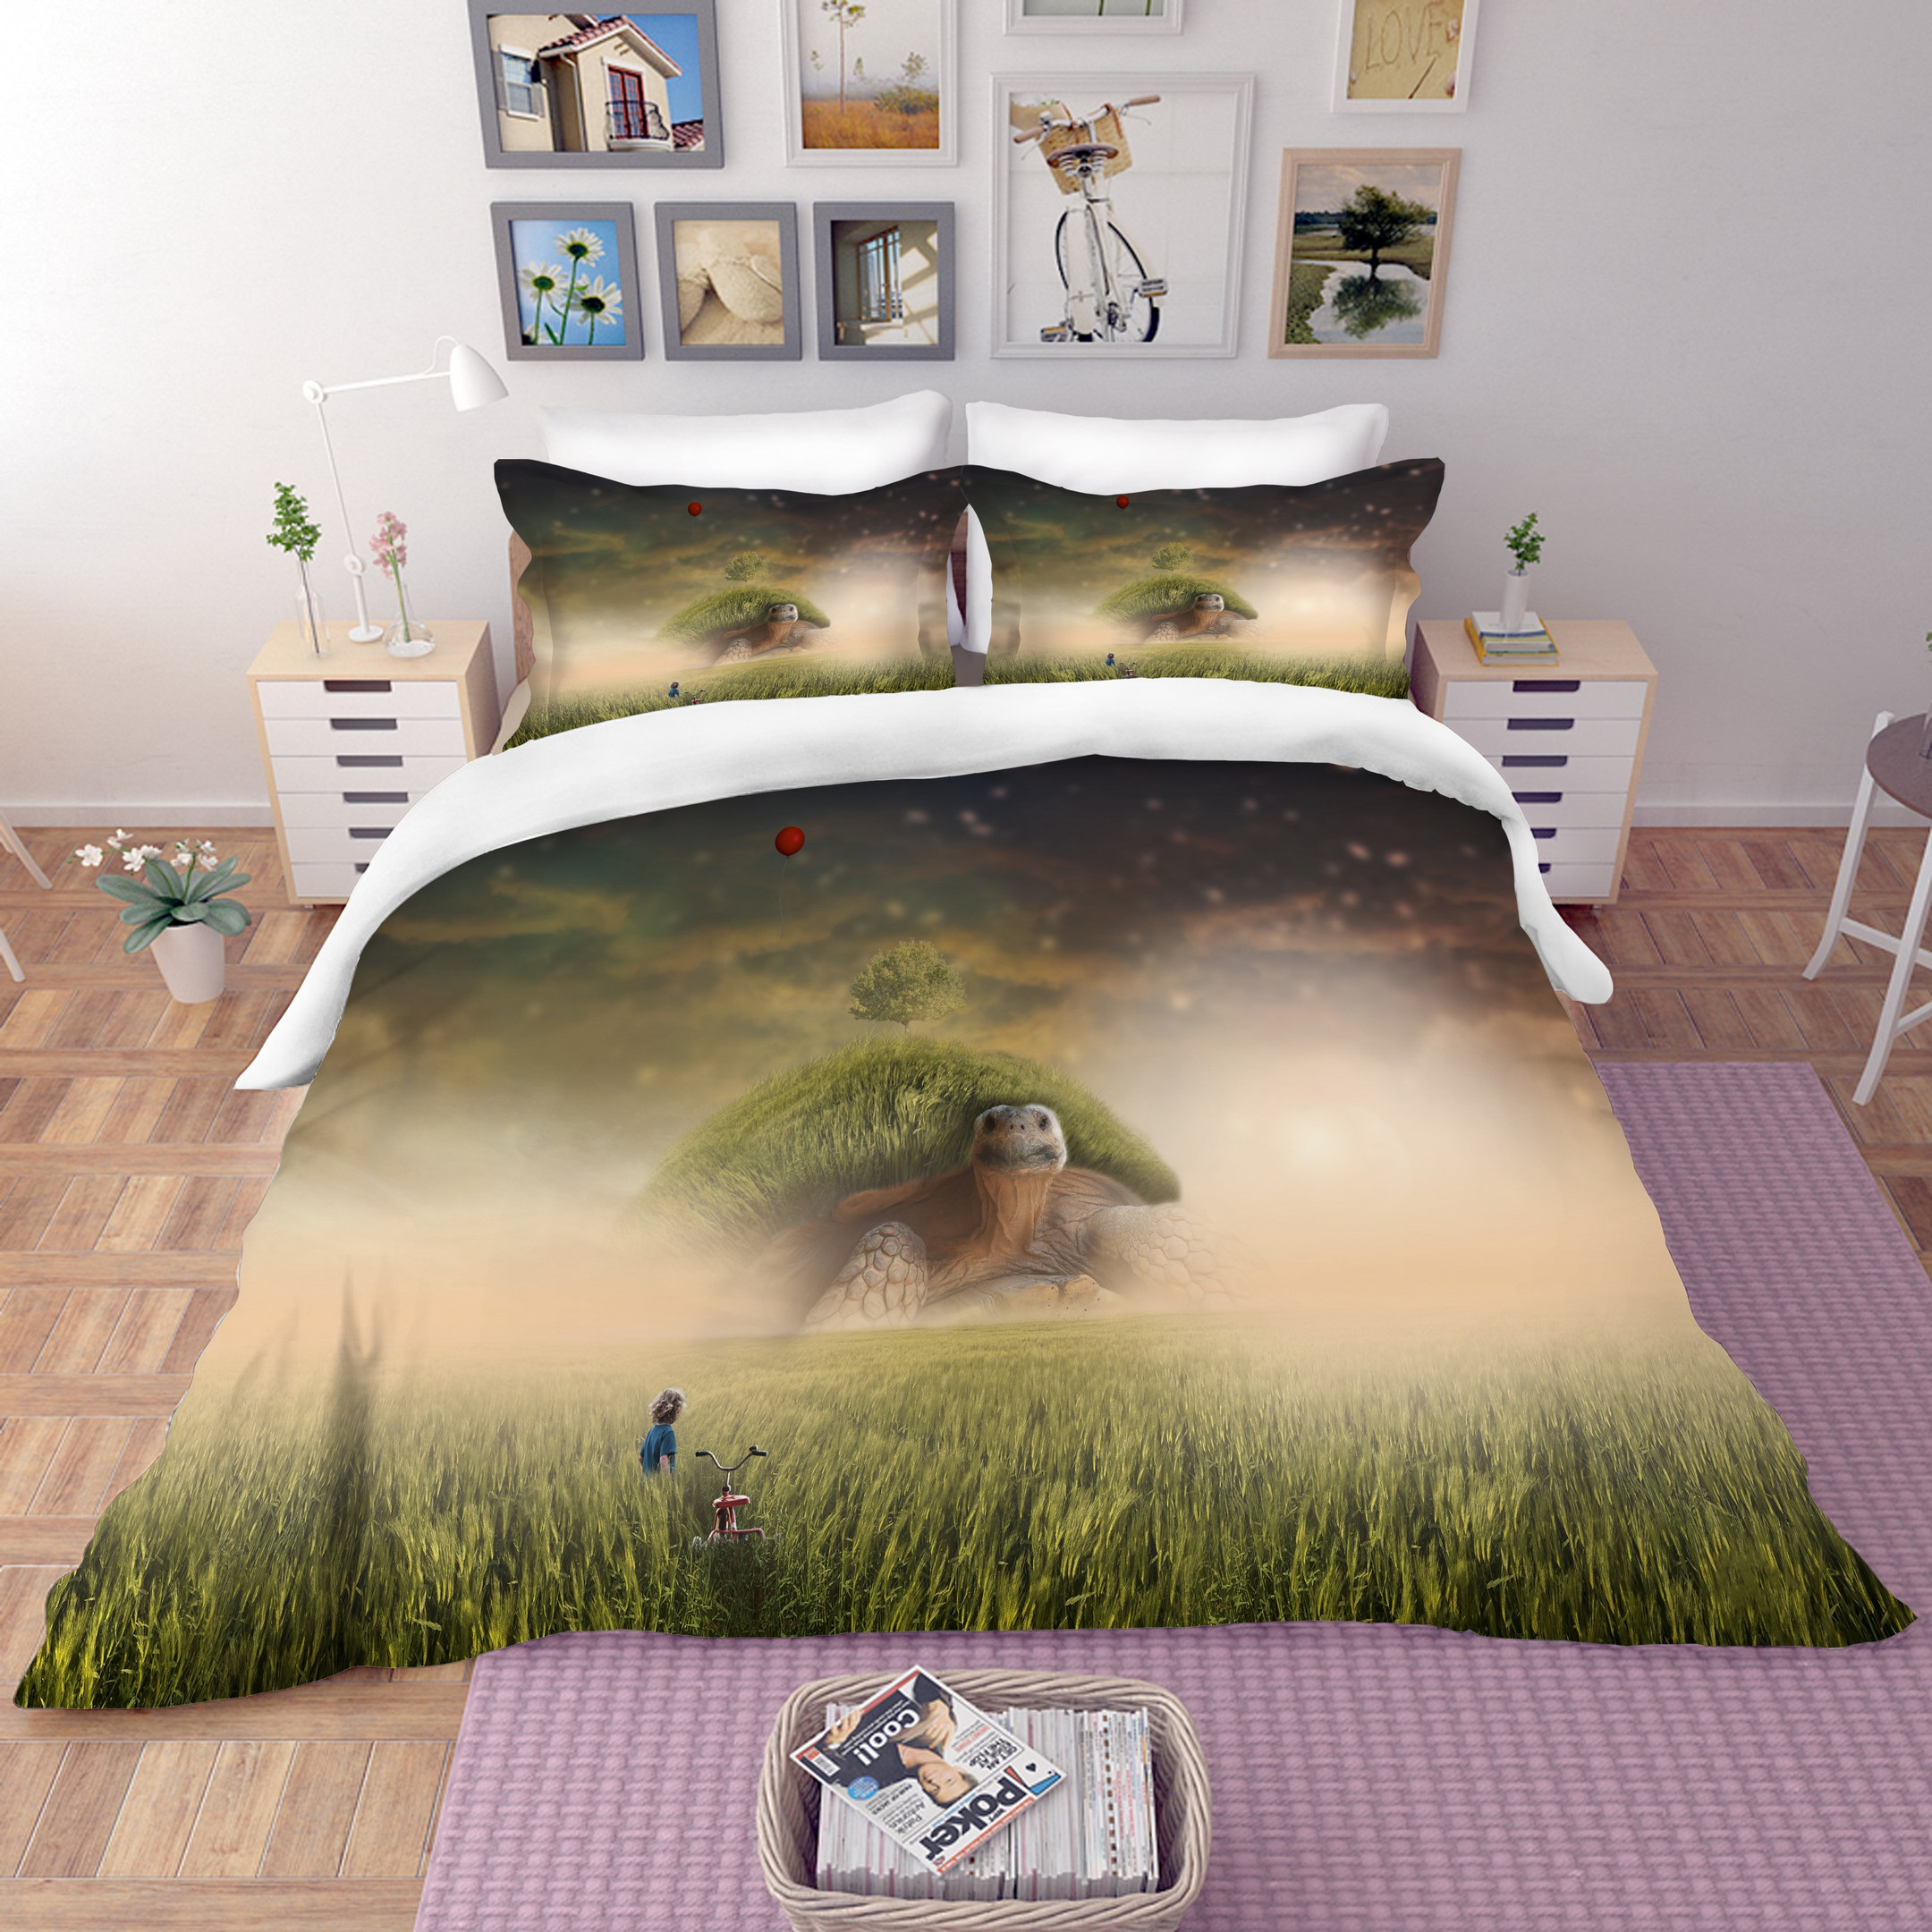 3d oversized turtle bedding sets with duvet cover and sheets 0p26d